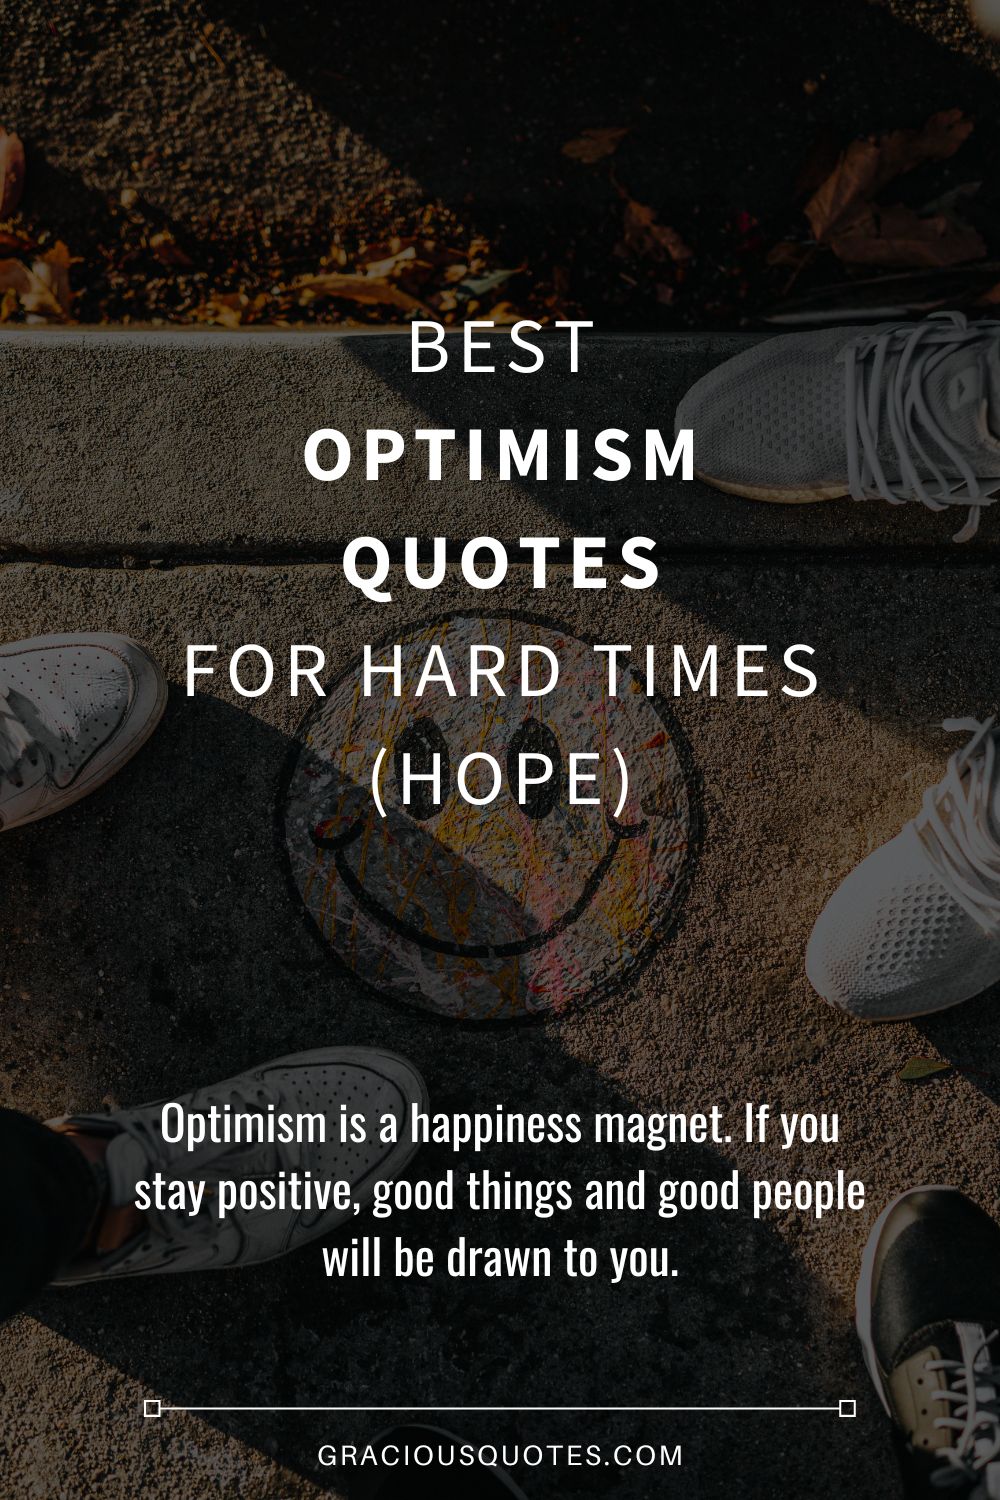 Best Optimism Quotes for Hard Times (HOPE) - Gracious Quotes